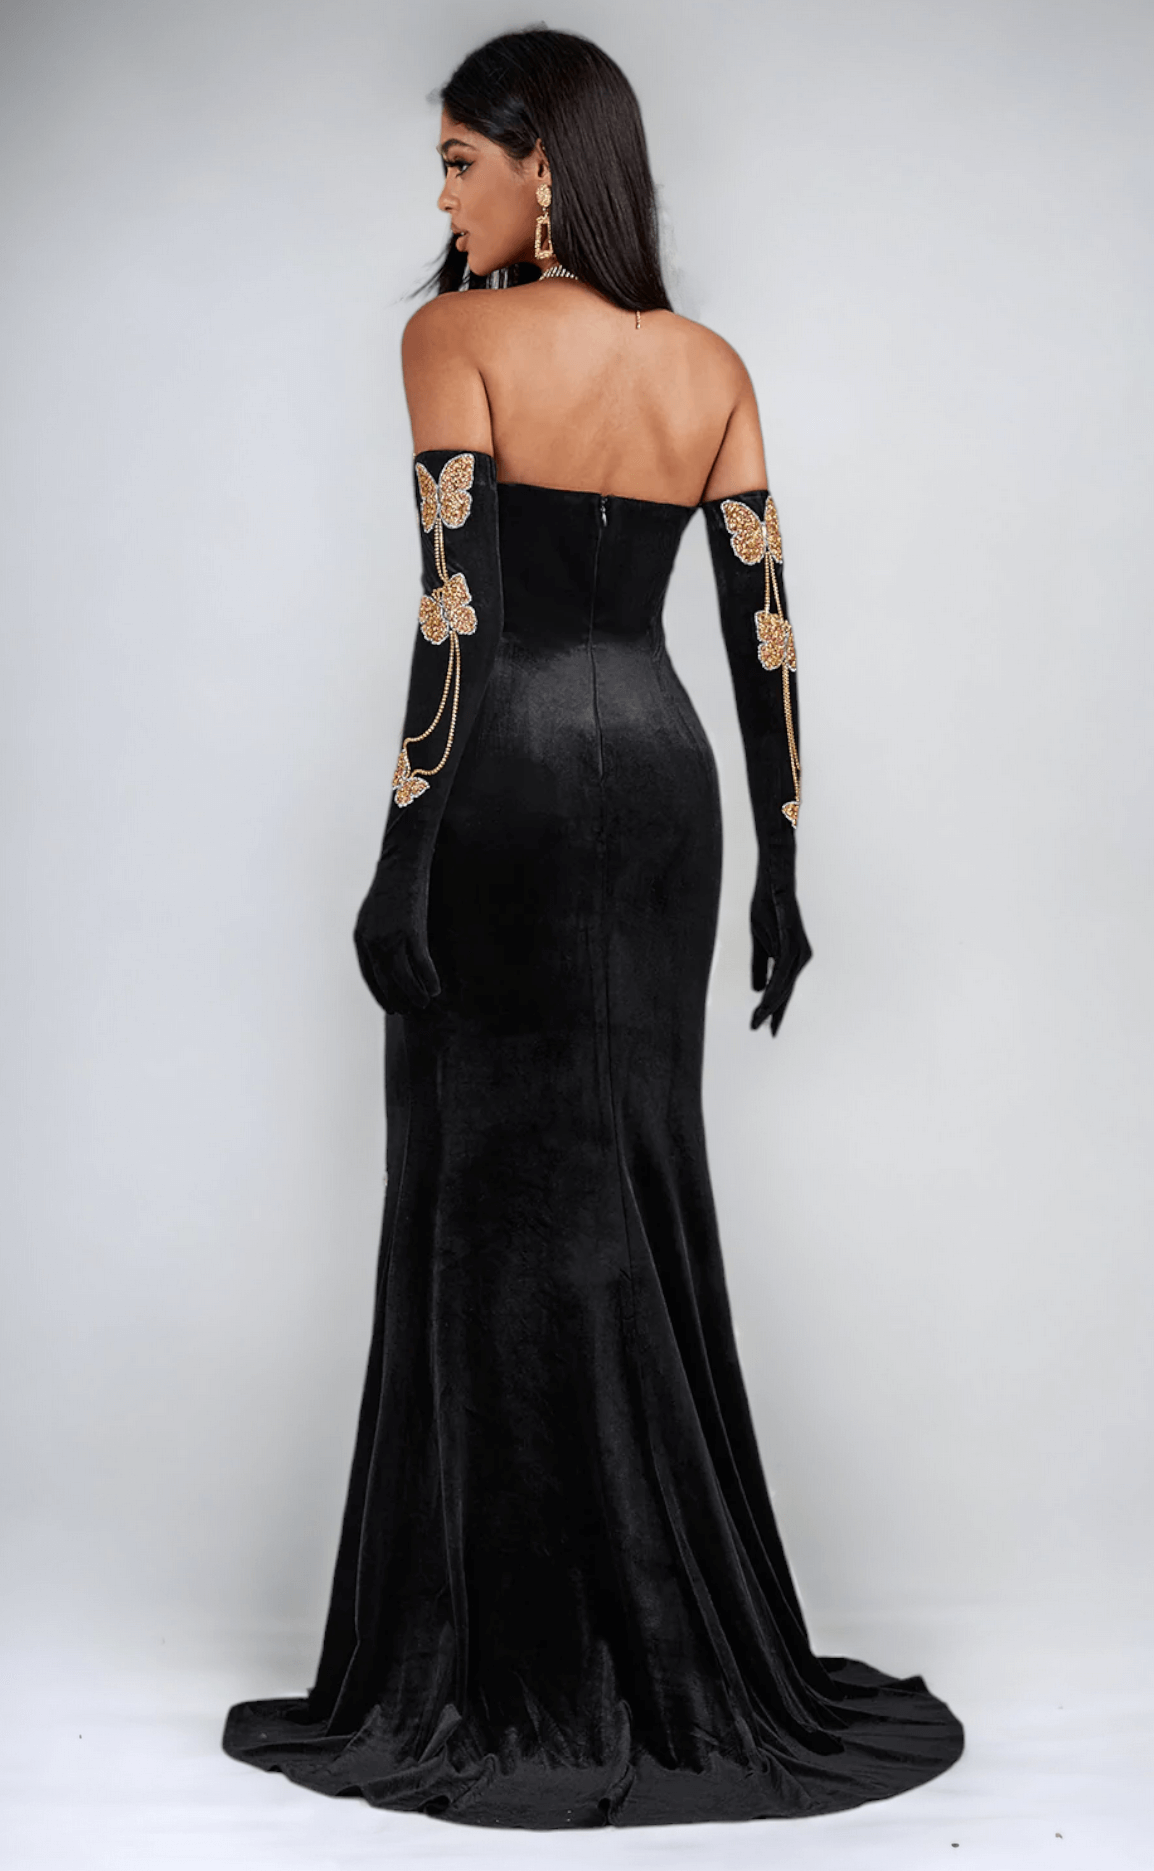 Maxi dress crafted from velvet fabric, adorned with a charming butterfly chain embellishment